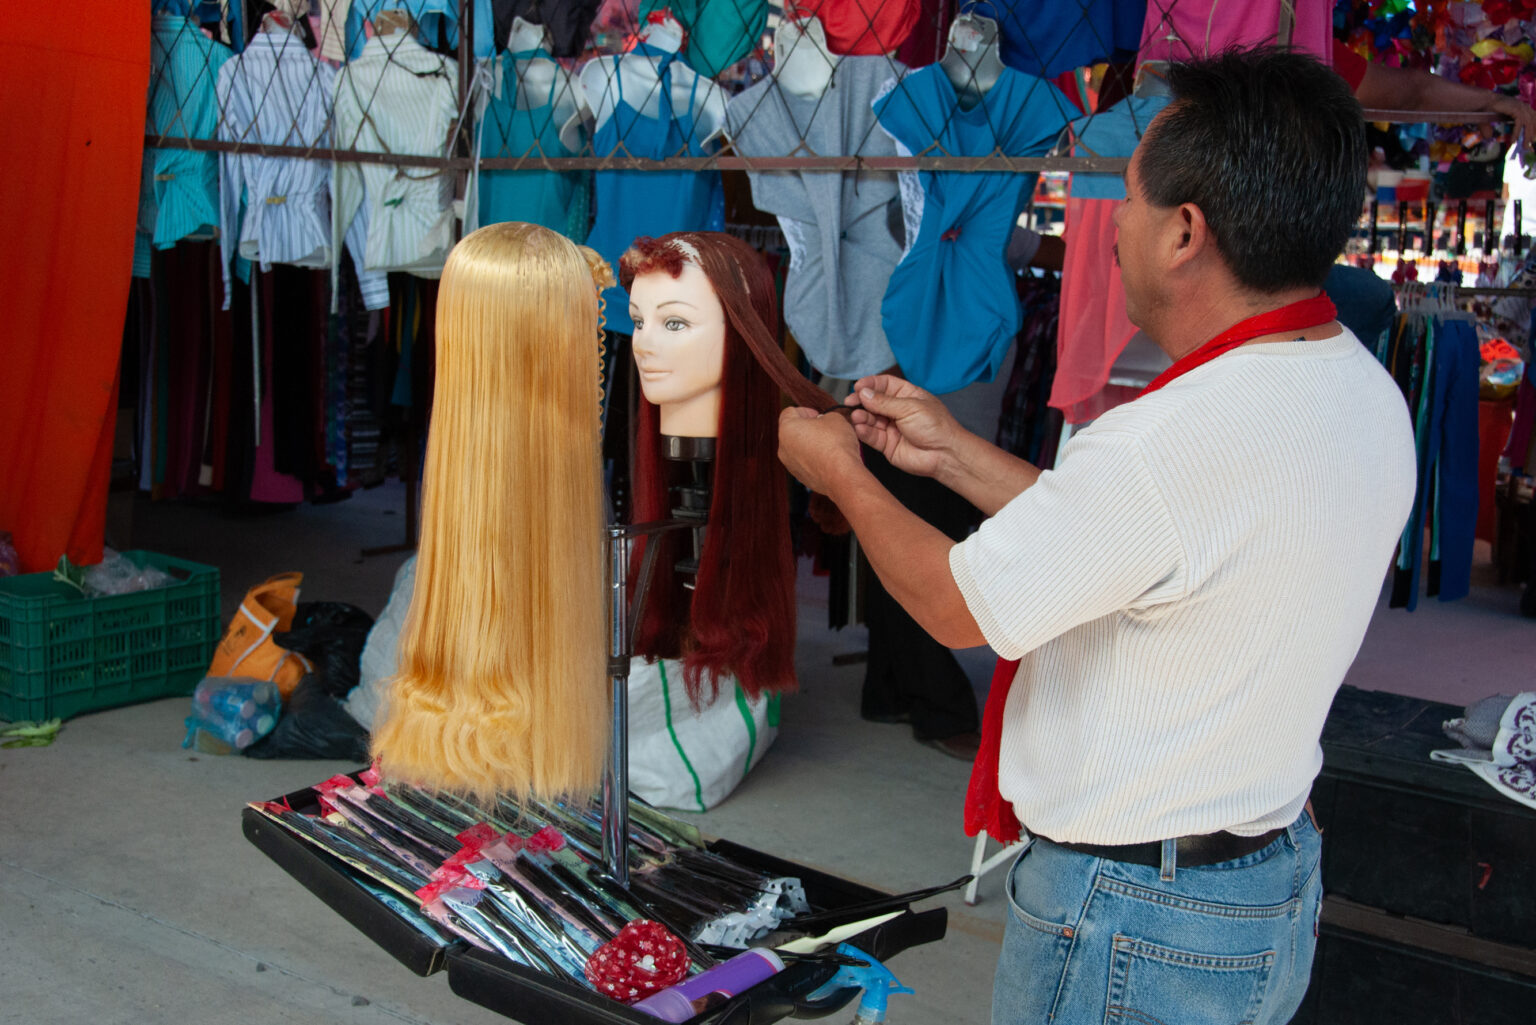 A merchant styles wigs at his stall